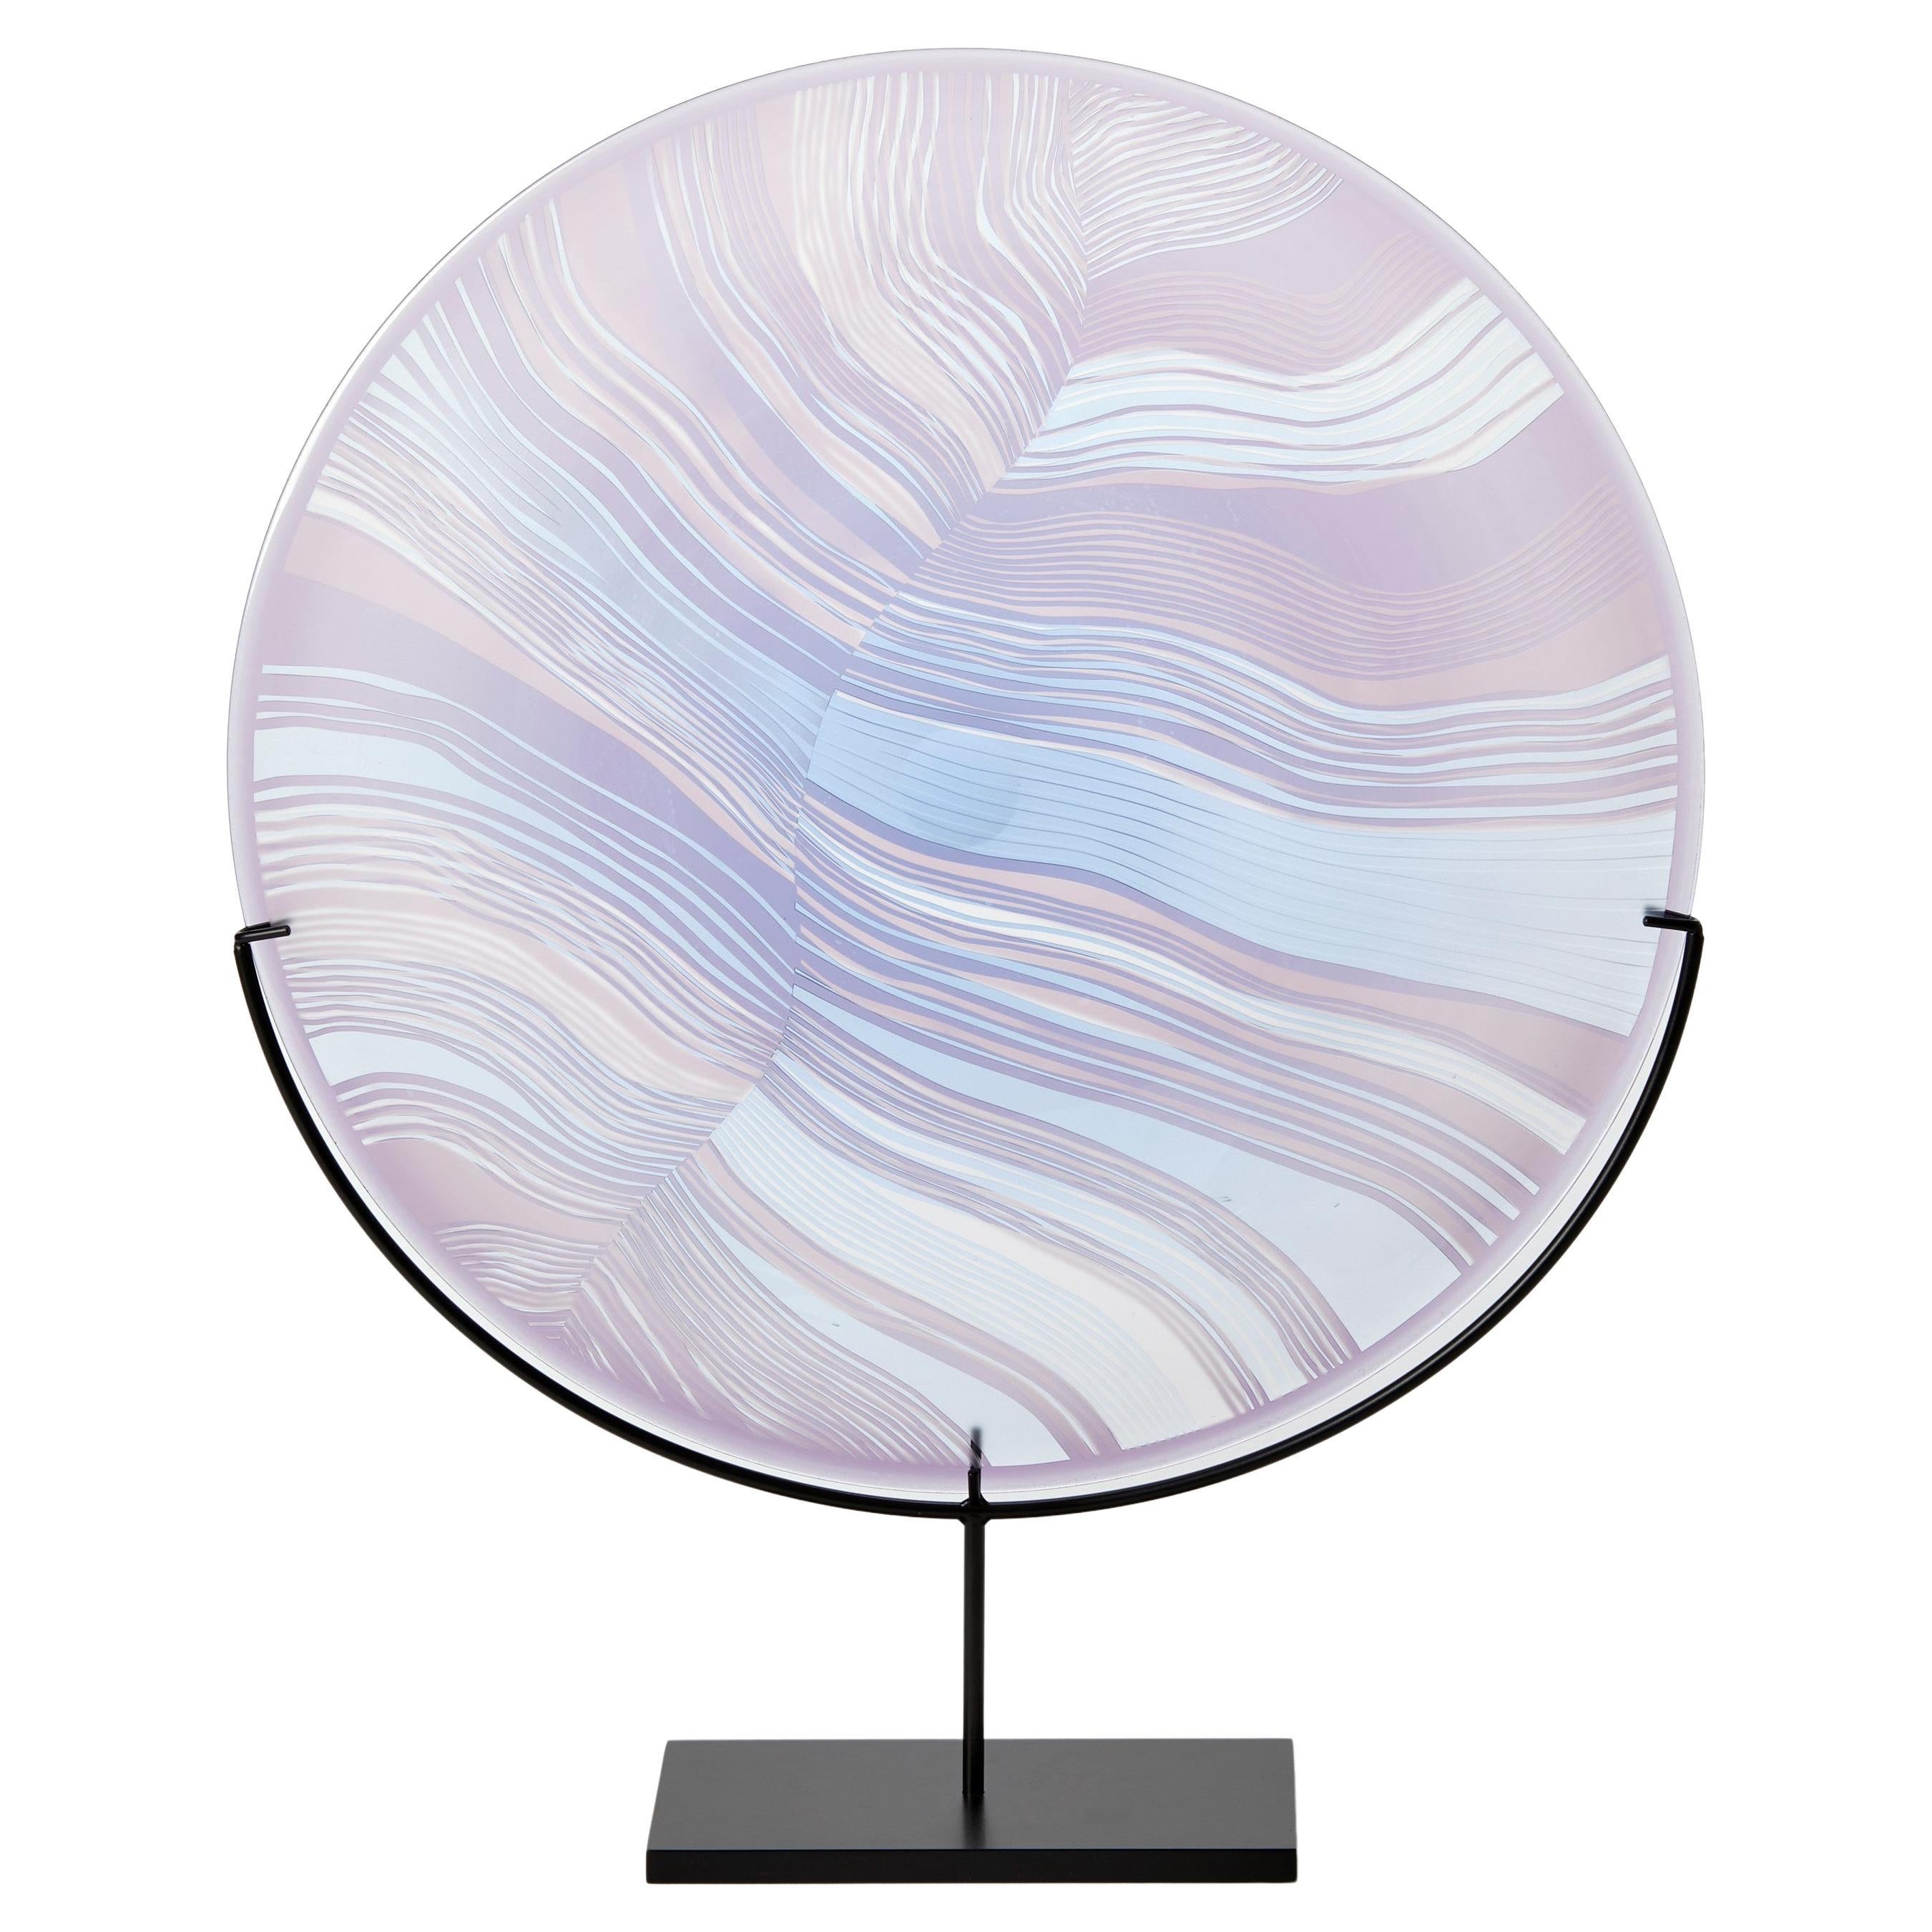 Solar Storm Sky Blue over Lilac, mounted linear cut glass artwork by Kate Jones For Sale